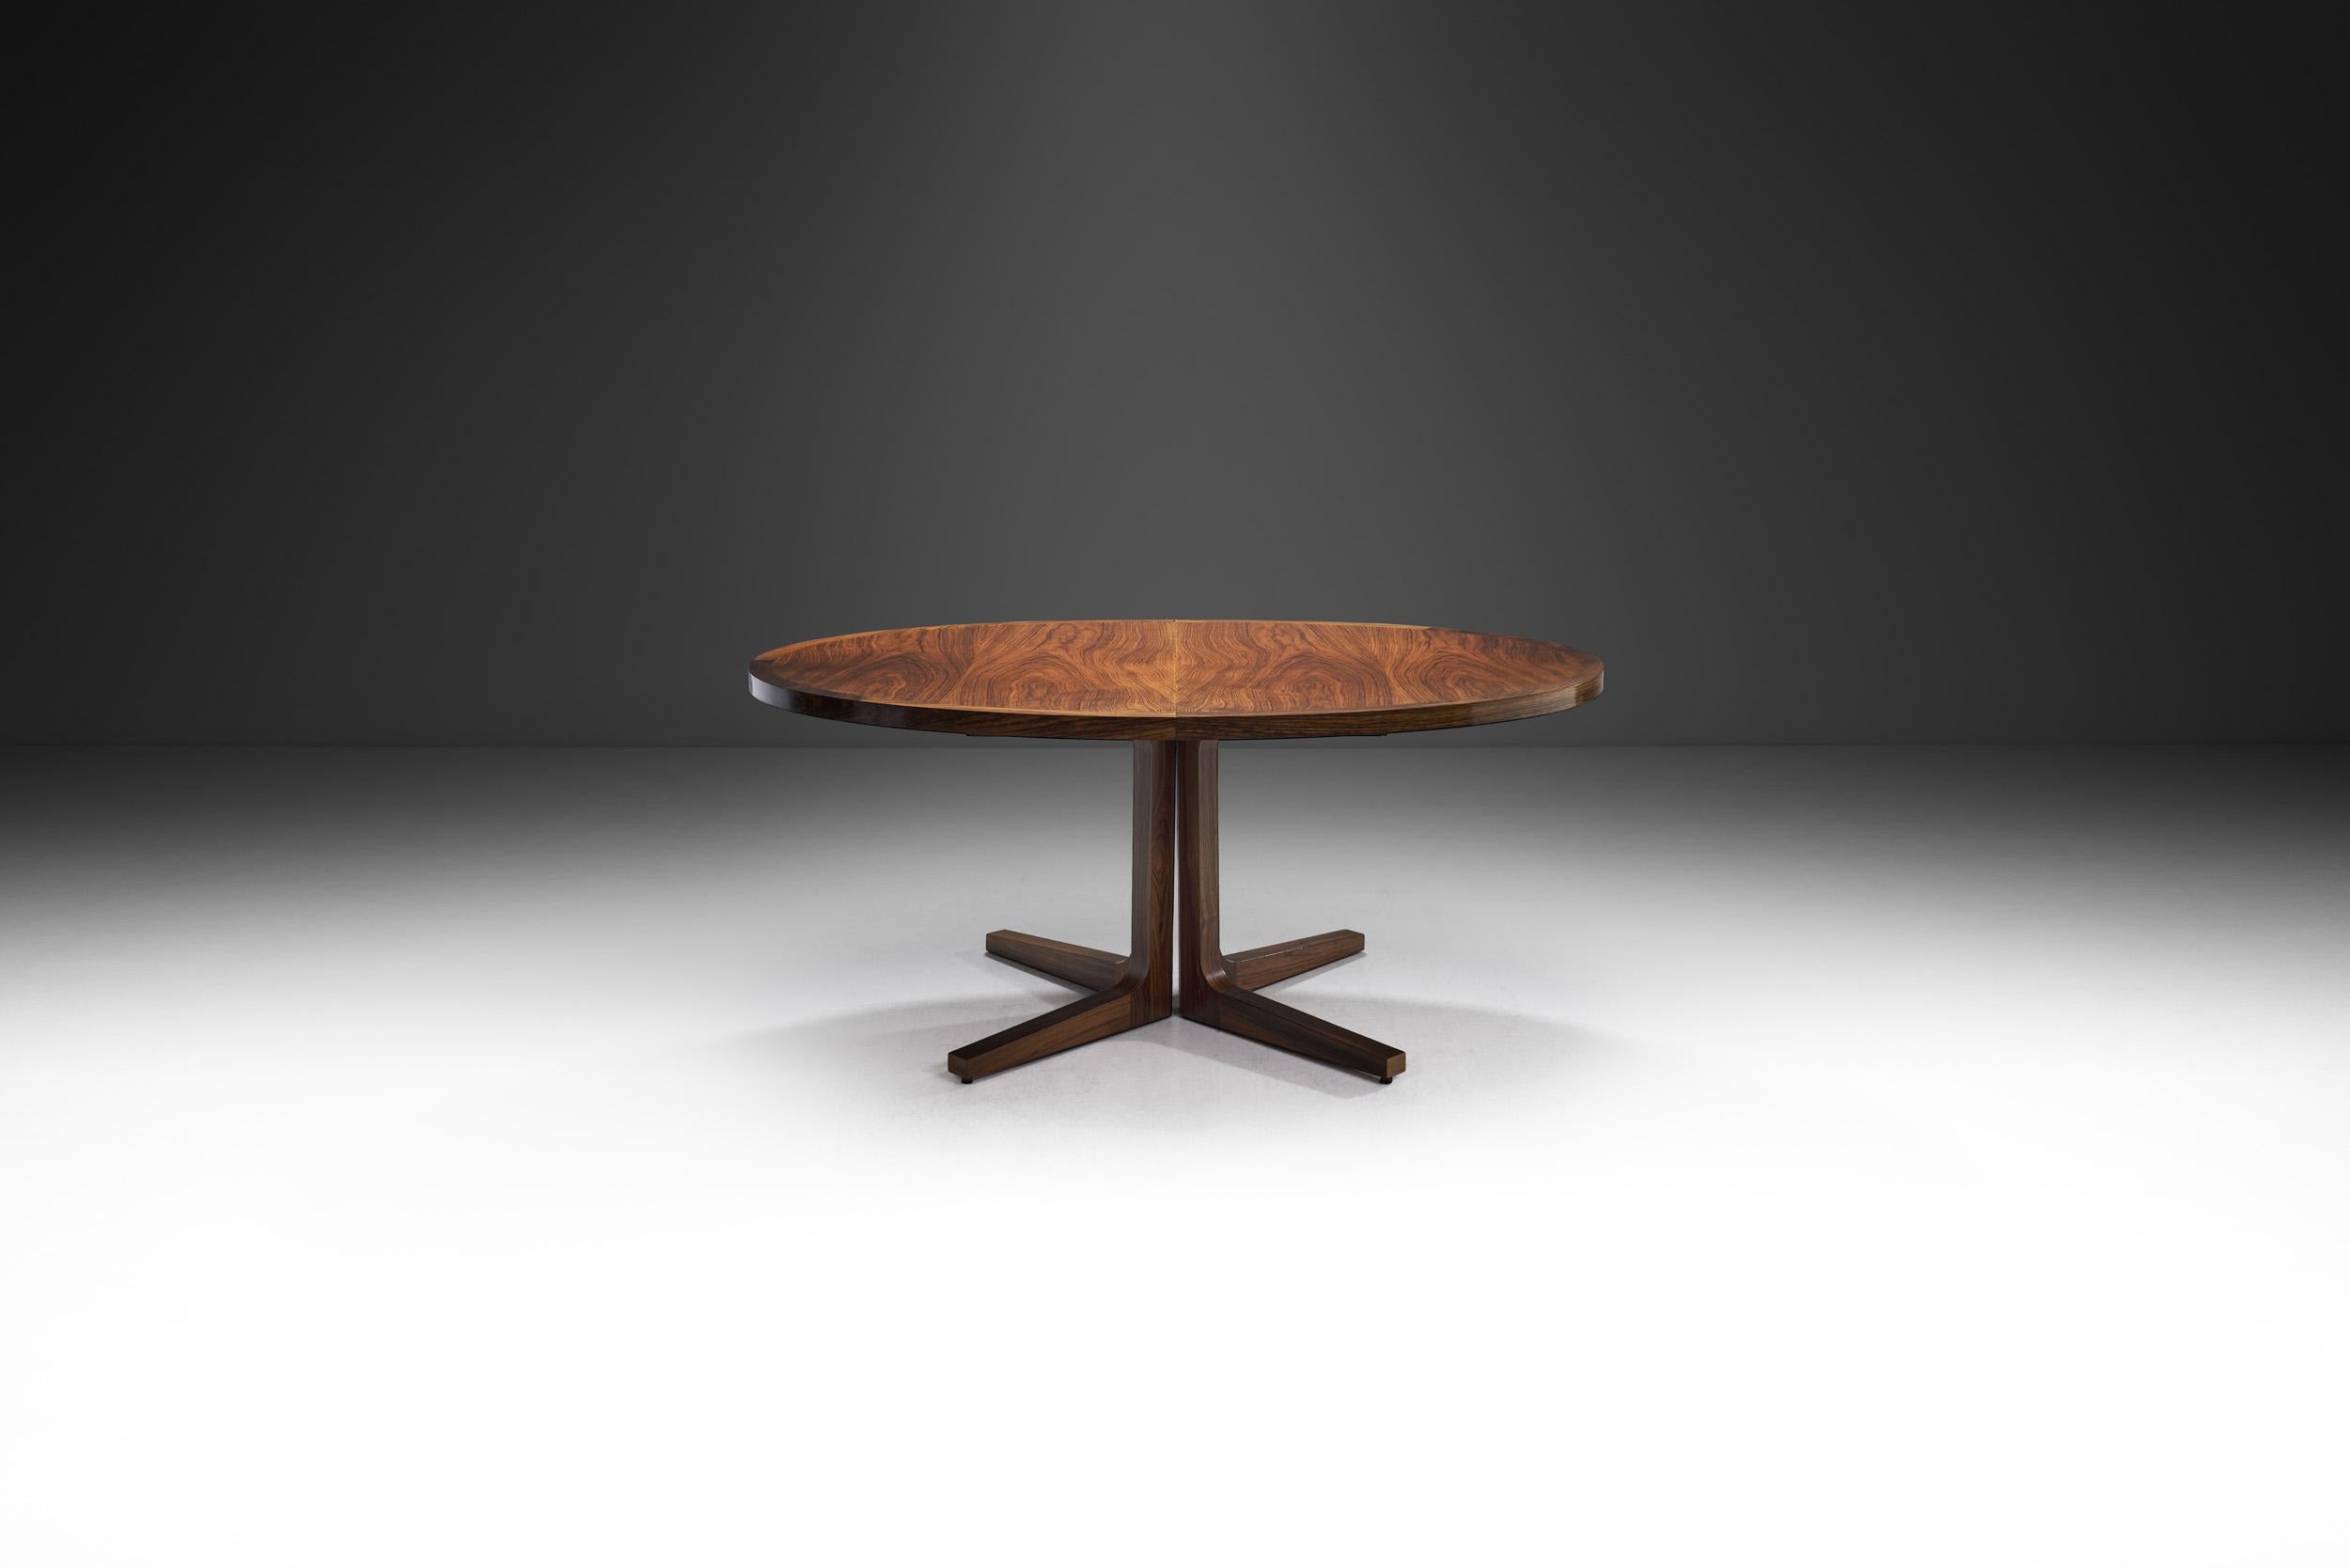 Precious woods and hand finishing define the furniture pieces made by the Danish company, Dyrlund. As this stunning table shows, great emphasis is placed on skilled craftsmanship with experts who work in the old craftsmanship style.

Using only